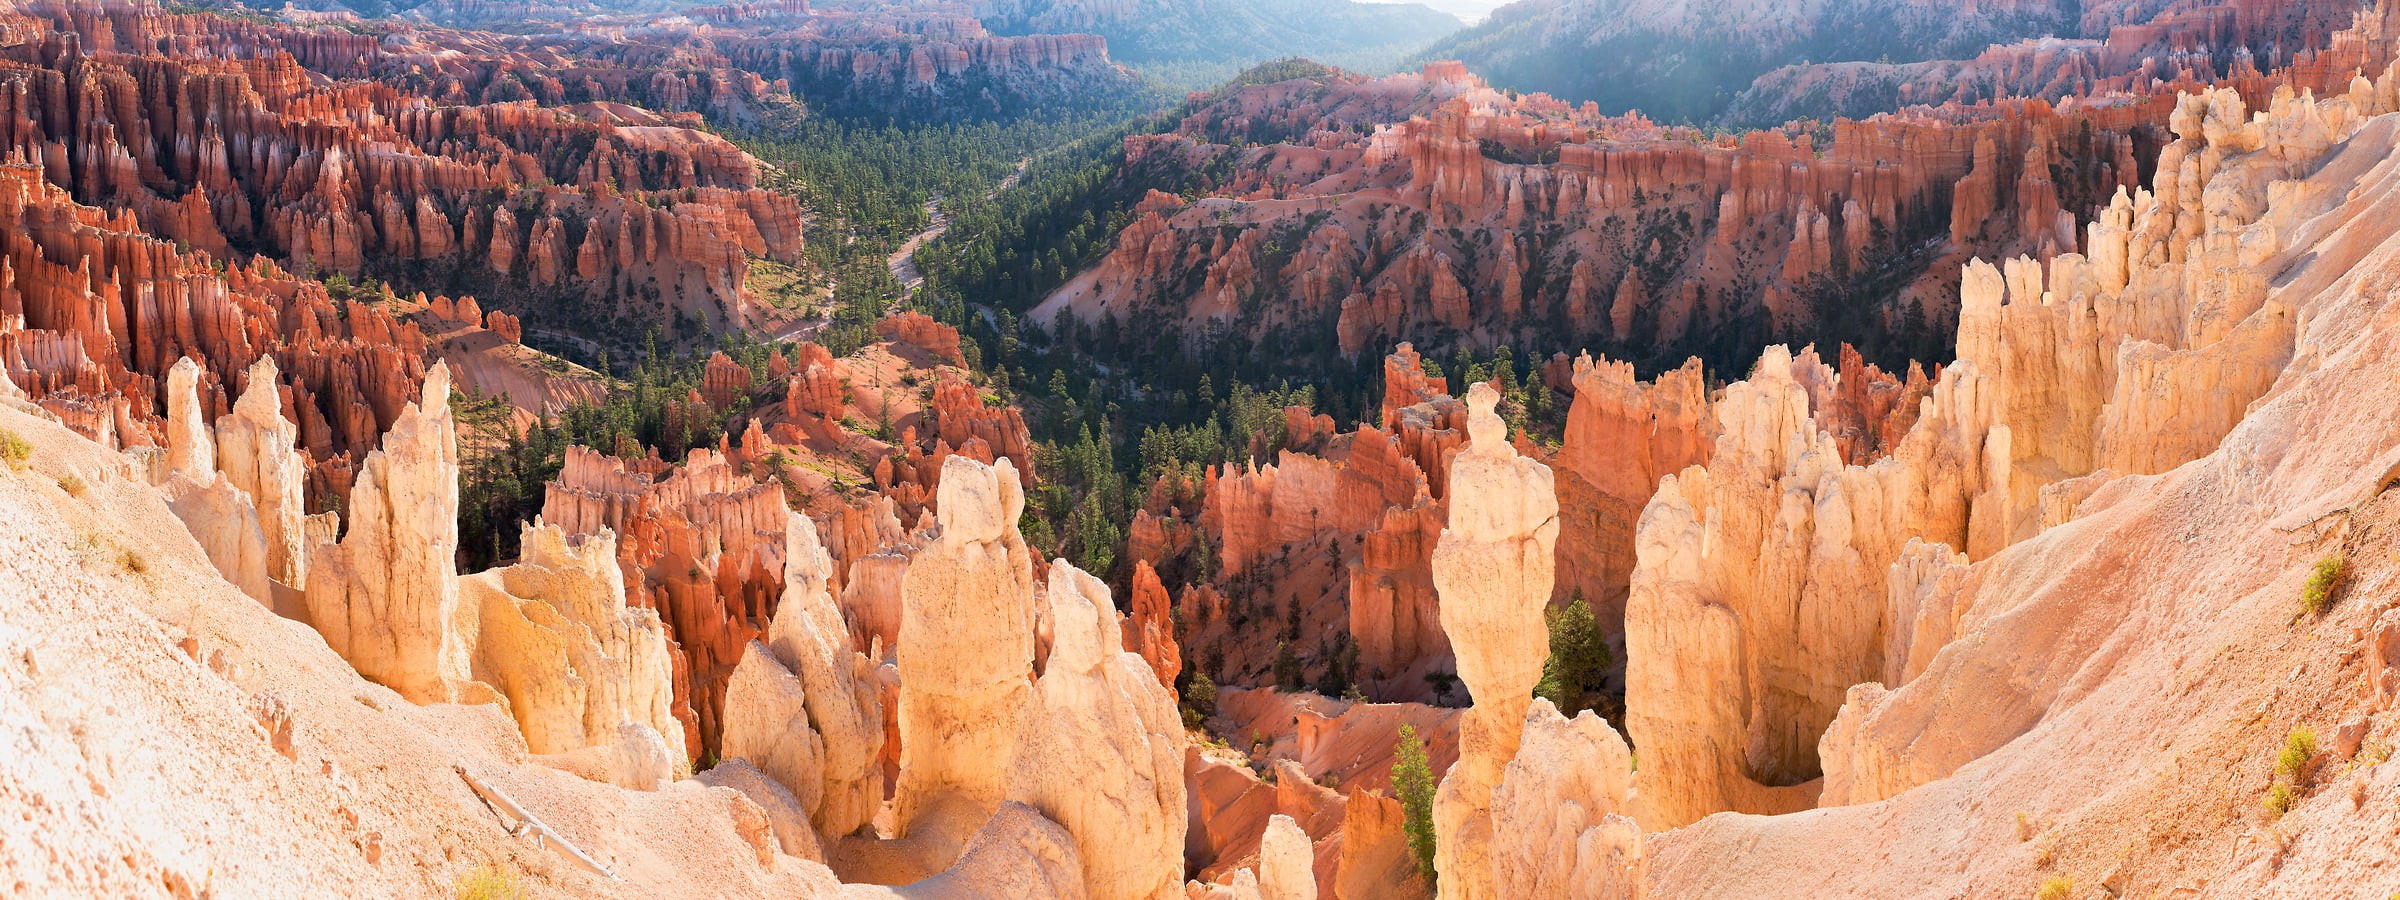 435 megapixels! A very high resolution, large-format VAST photo of an American landscape with natural formations; geological photograph created by Jim Tarpo in Bryce Canyon National Park, Utah